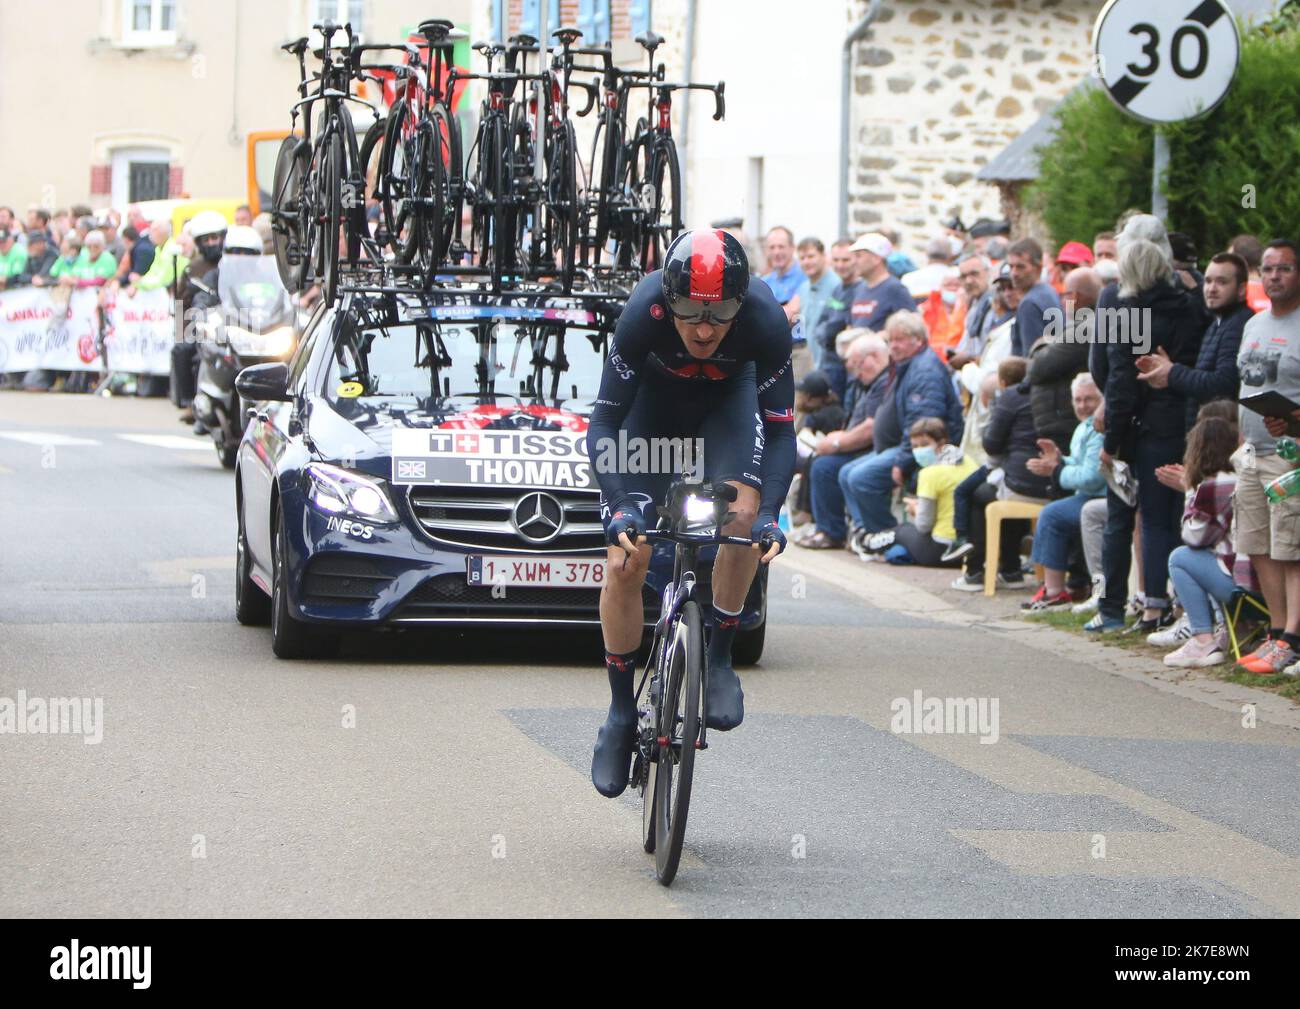 ©Laurent Lairys/MAXPPP - GERAINT THOMAS of INEOS GRENADIERS during the Tour de France 2021, Cycling race stage 5, time trial, Change - Laval (27,2 Km) on June 30, 2021 in Laval, France - Photo Laurent Lairys / MAXPPP - 2021 Tour de France stage 5 time trial June 30 2021  Stock Photo